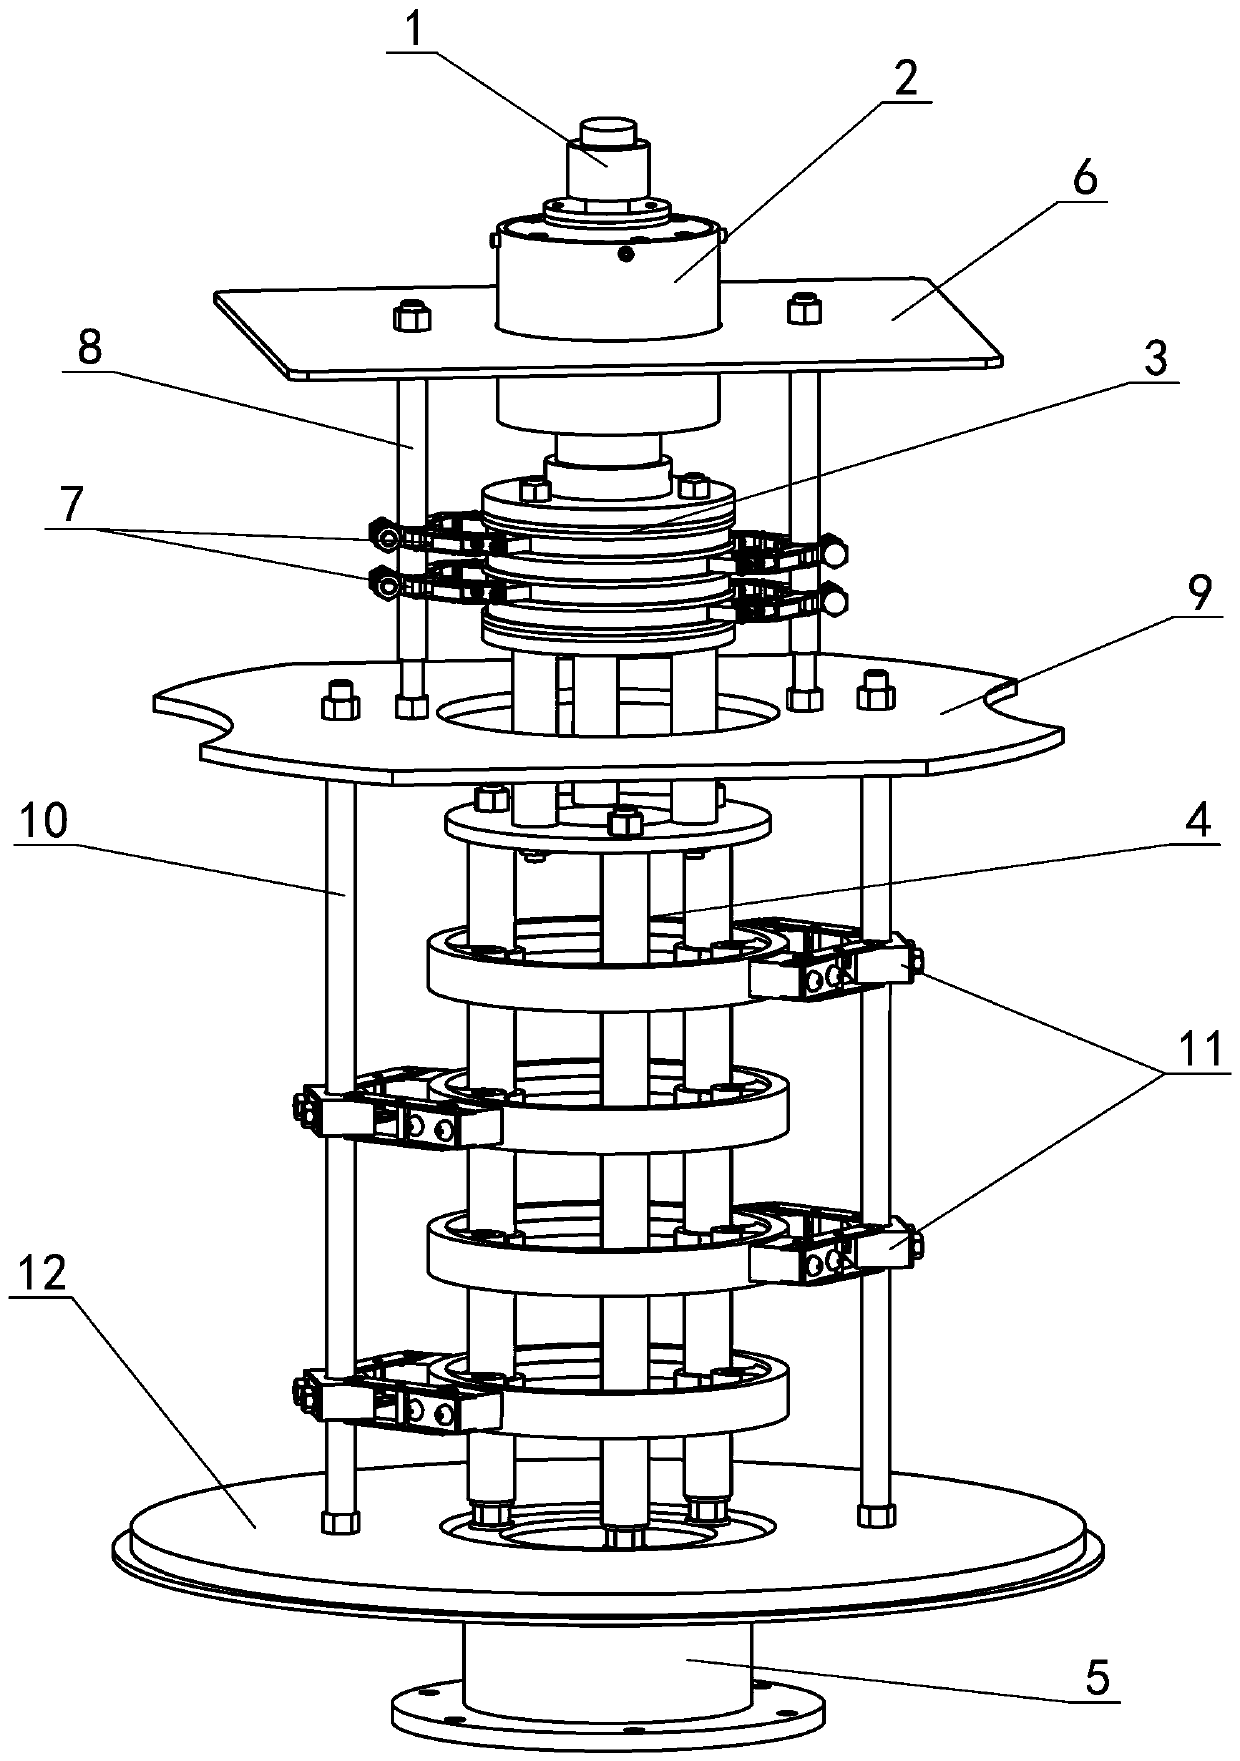 Liquid, power and gas mixed slip ring device